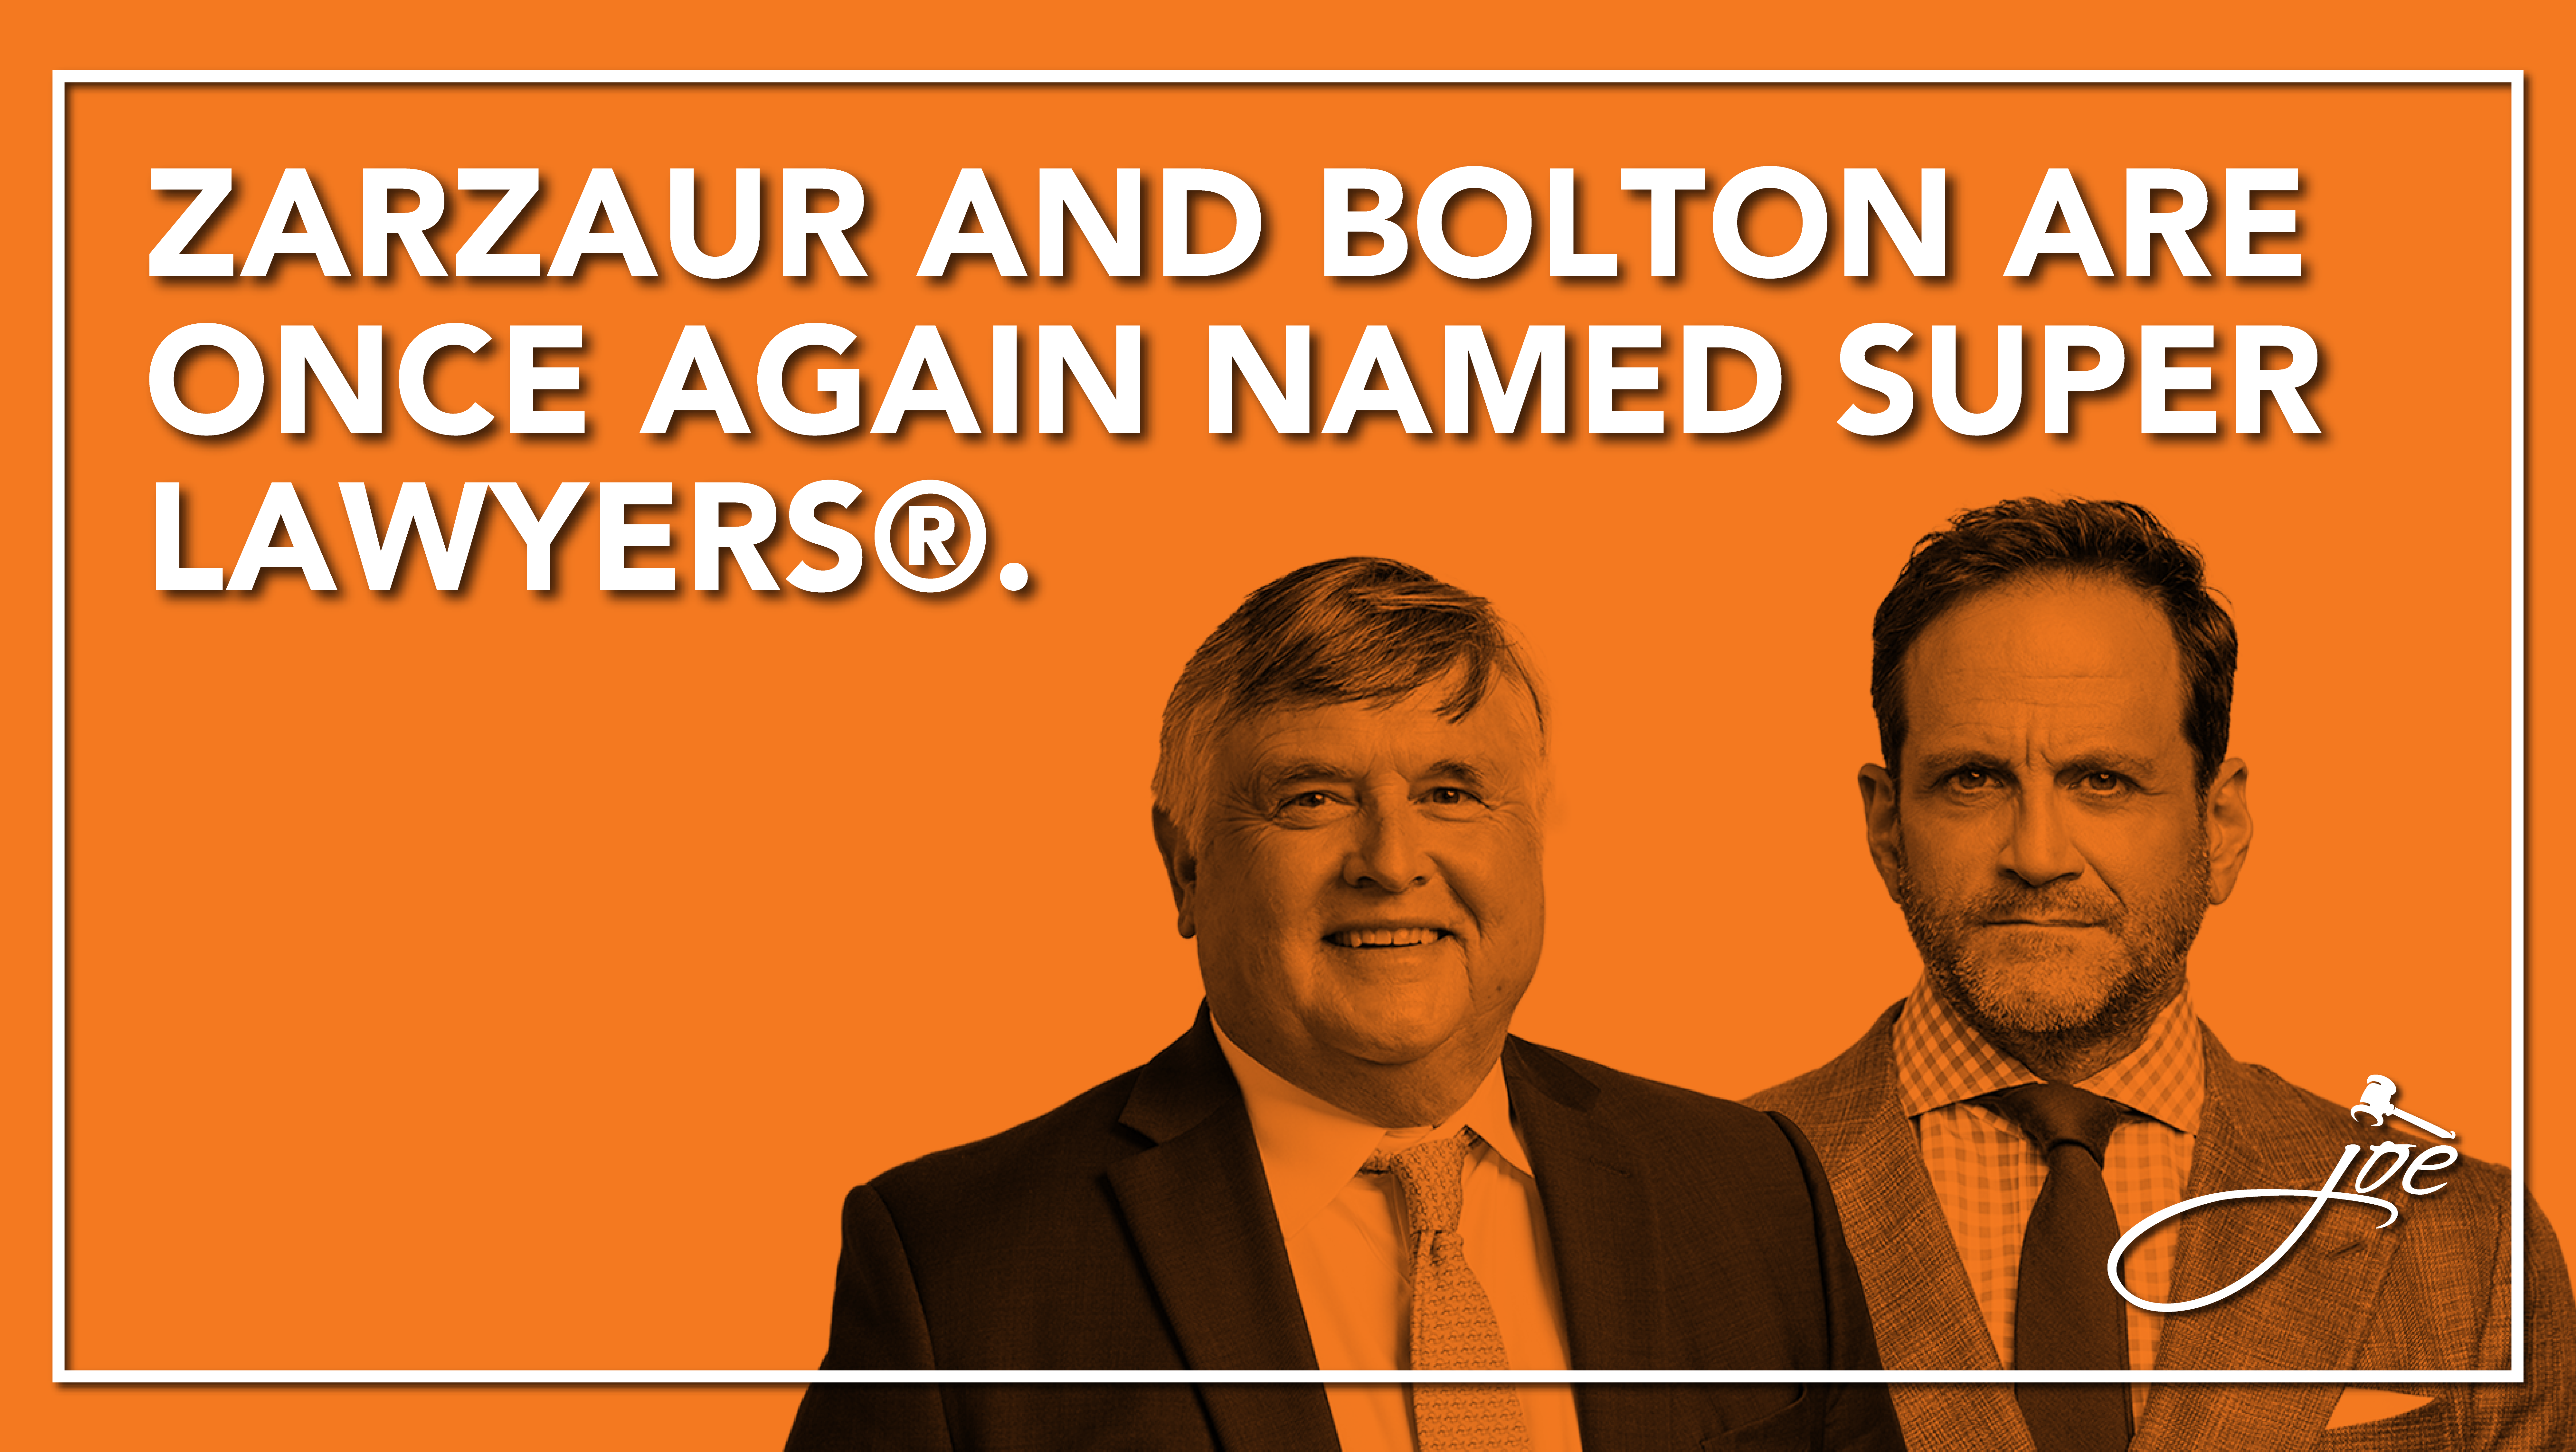 Zarzaur And Bolton Are Once Again Named Super Lawyers®.